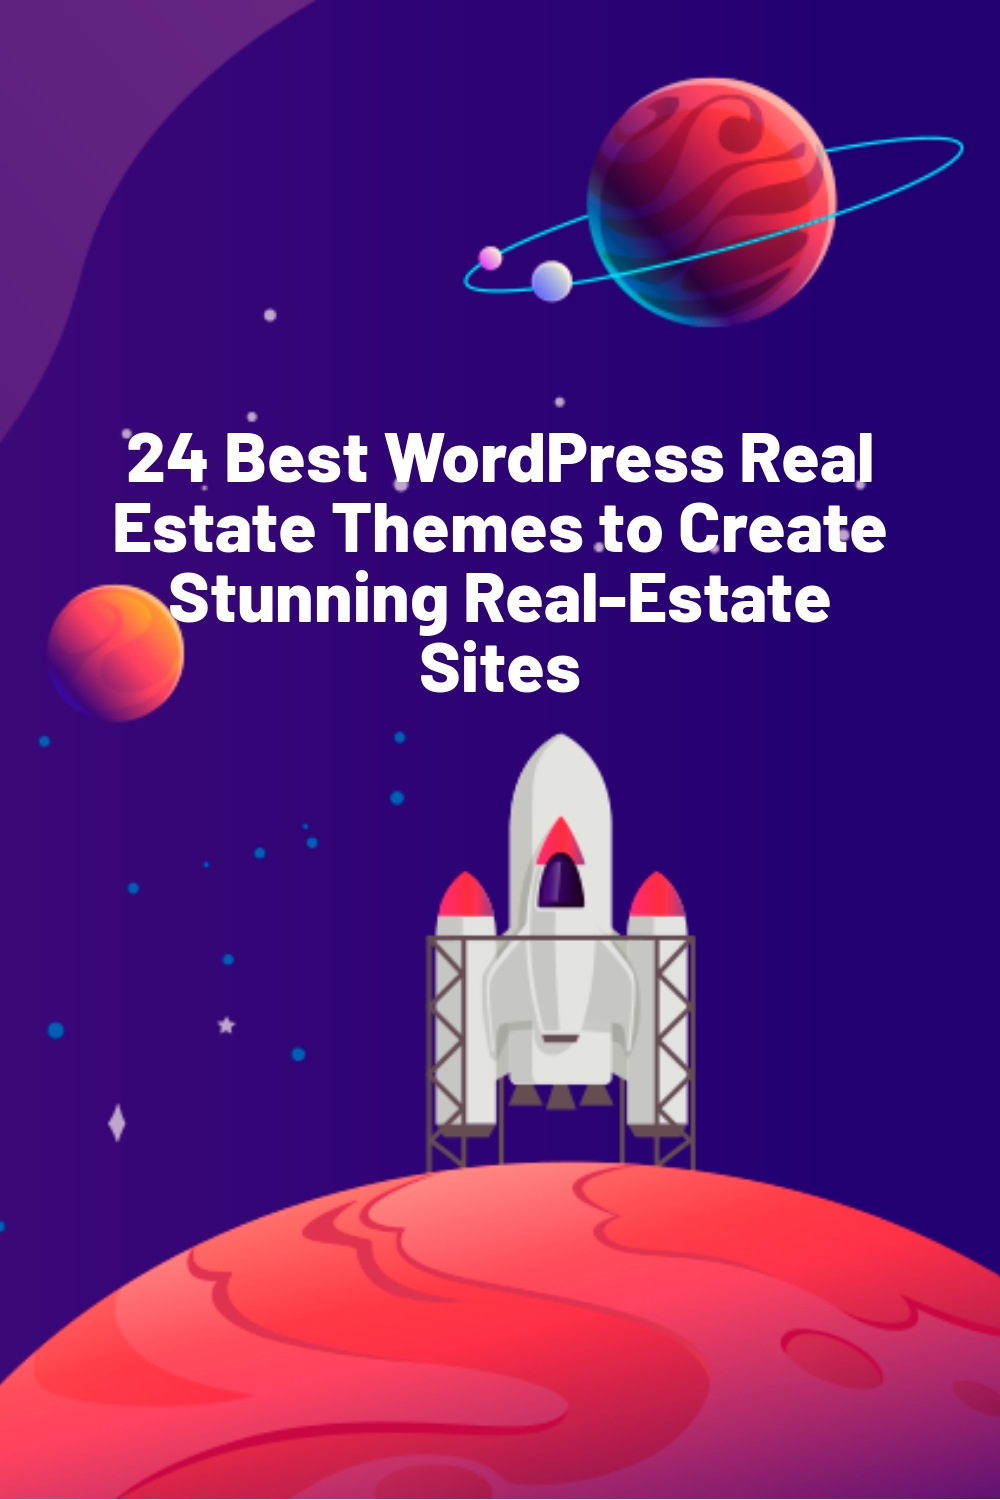 24 Best WordPress Real Estate Themes to Create Stunning Real-Estate Sites